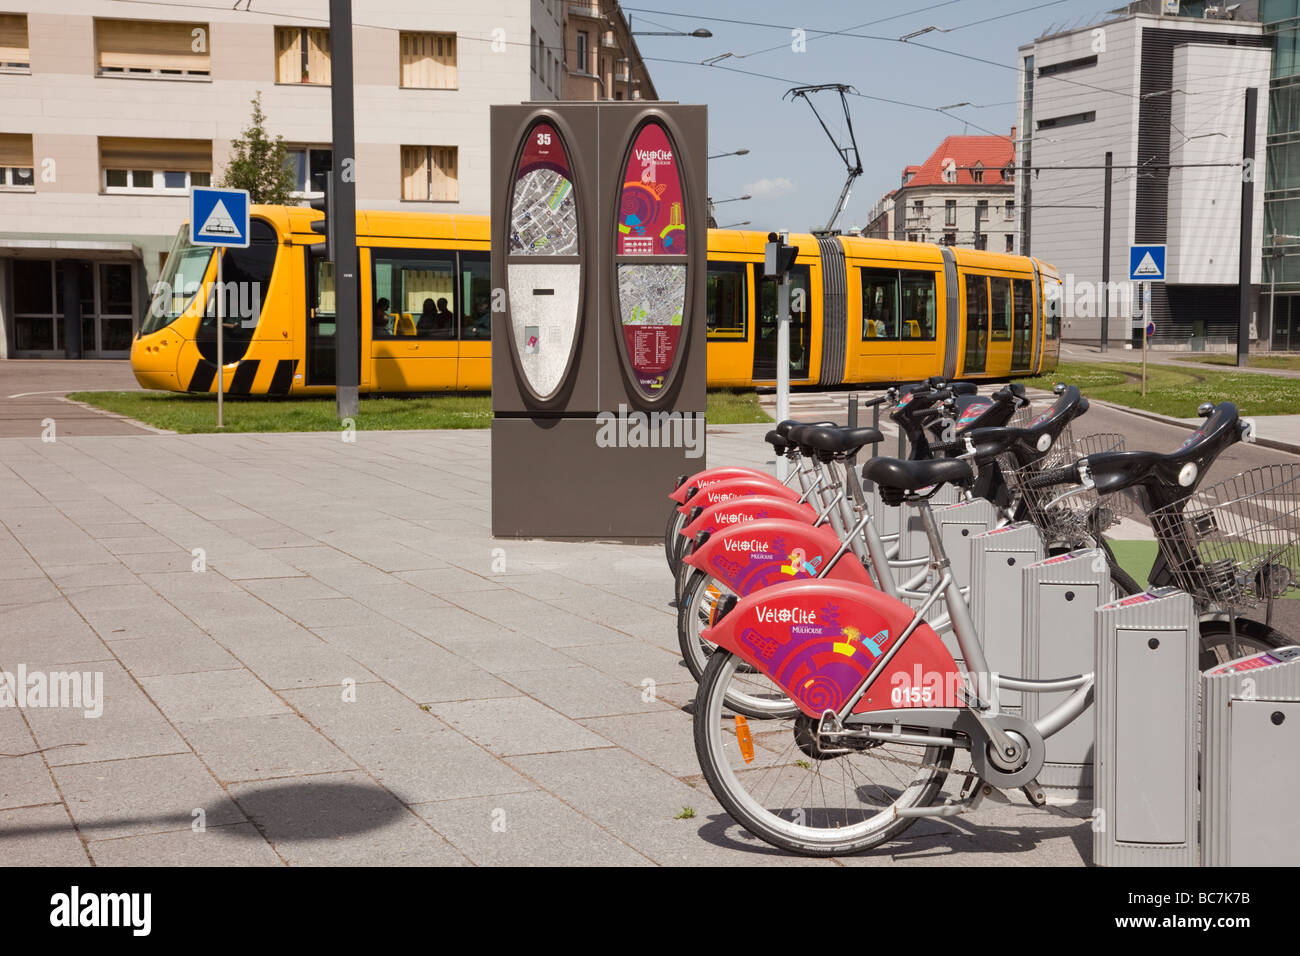 Mulhouse Alsace France Europe Velocity electric bikes for rent by tramway station with yellow tram train on light rail network Stock Photo